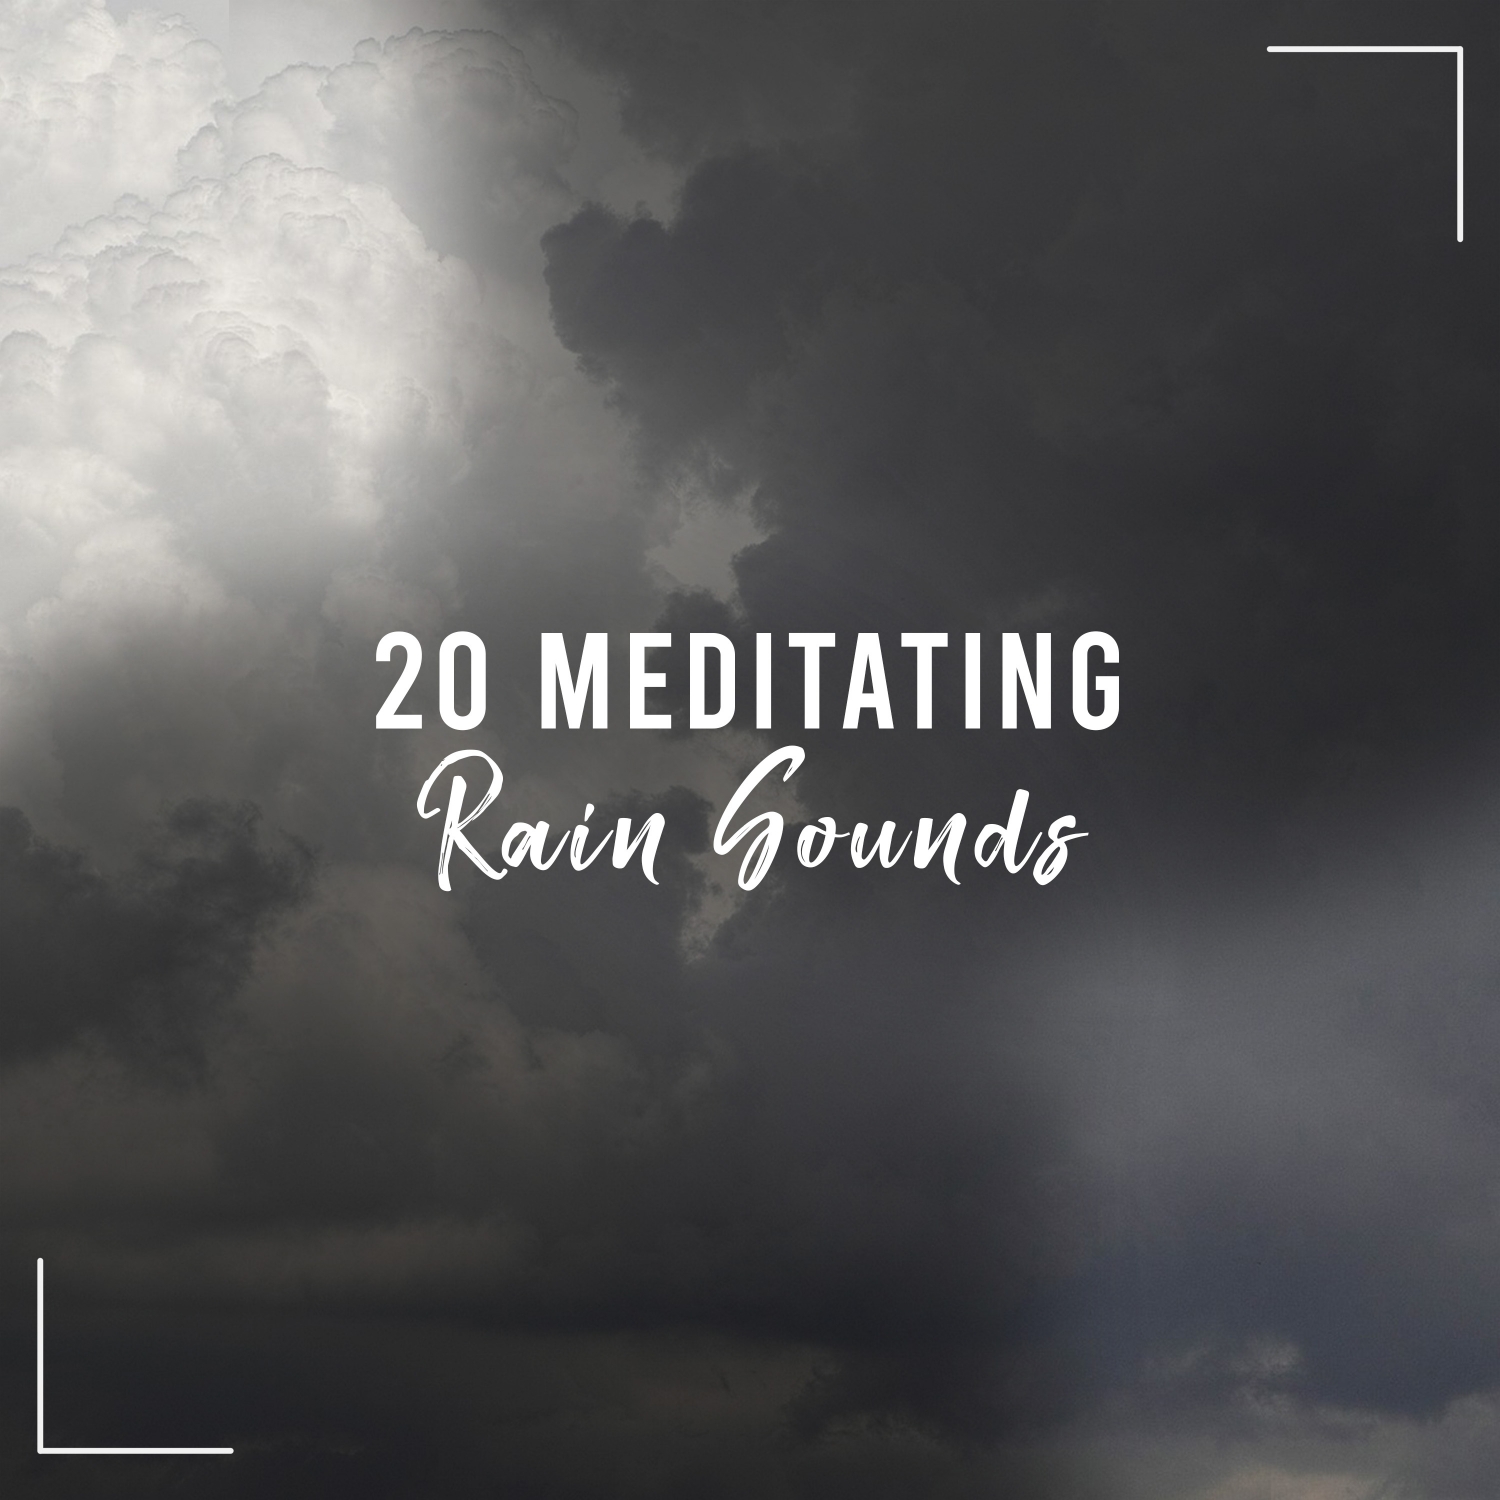 20 Meditating Rain Sounds - Tranquil Background Noise for Pure Relaxation, Sleep and Yoga